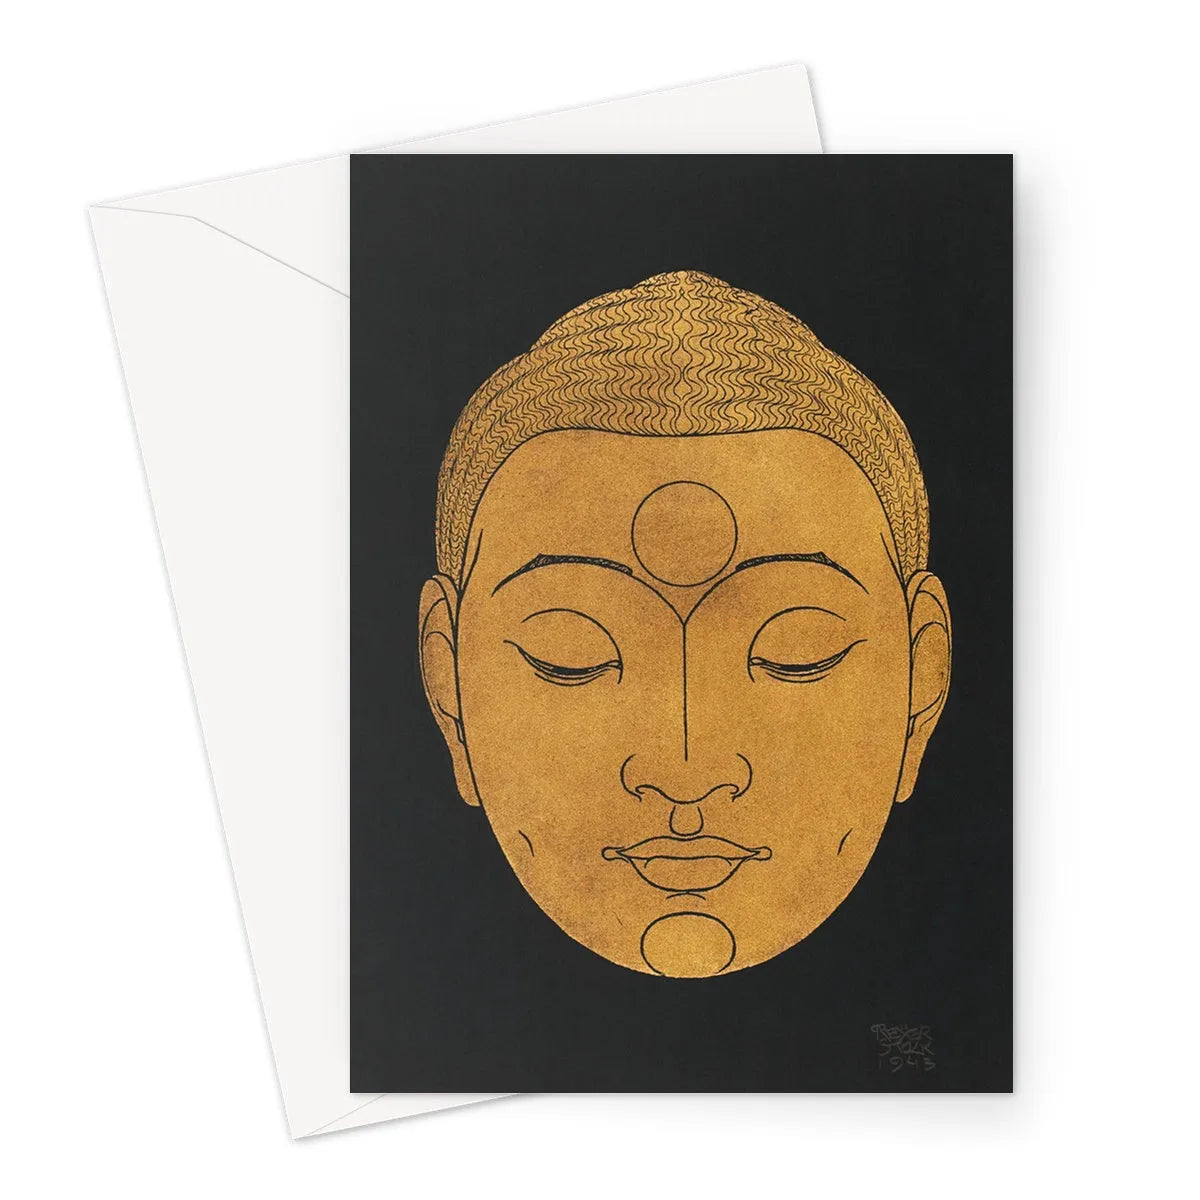 Head Of Buddha By Reijer Stolk Greeting Card - A5 Portrait / 1 Card - Greeting & Note Cards - Aesthetic Art